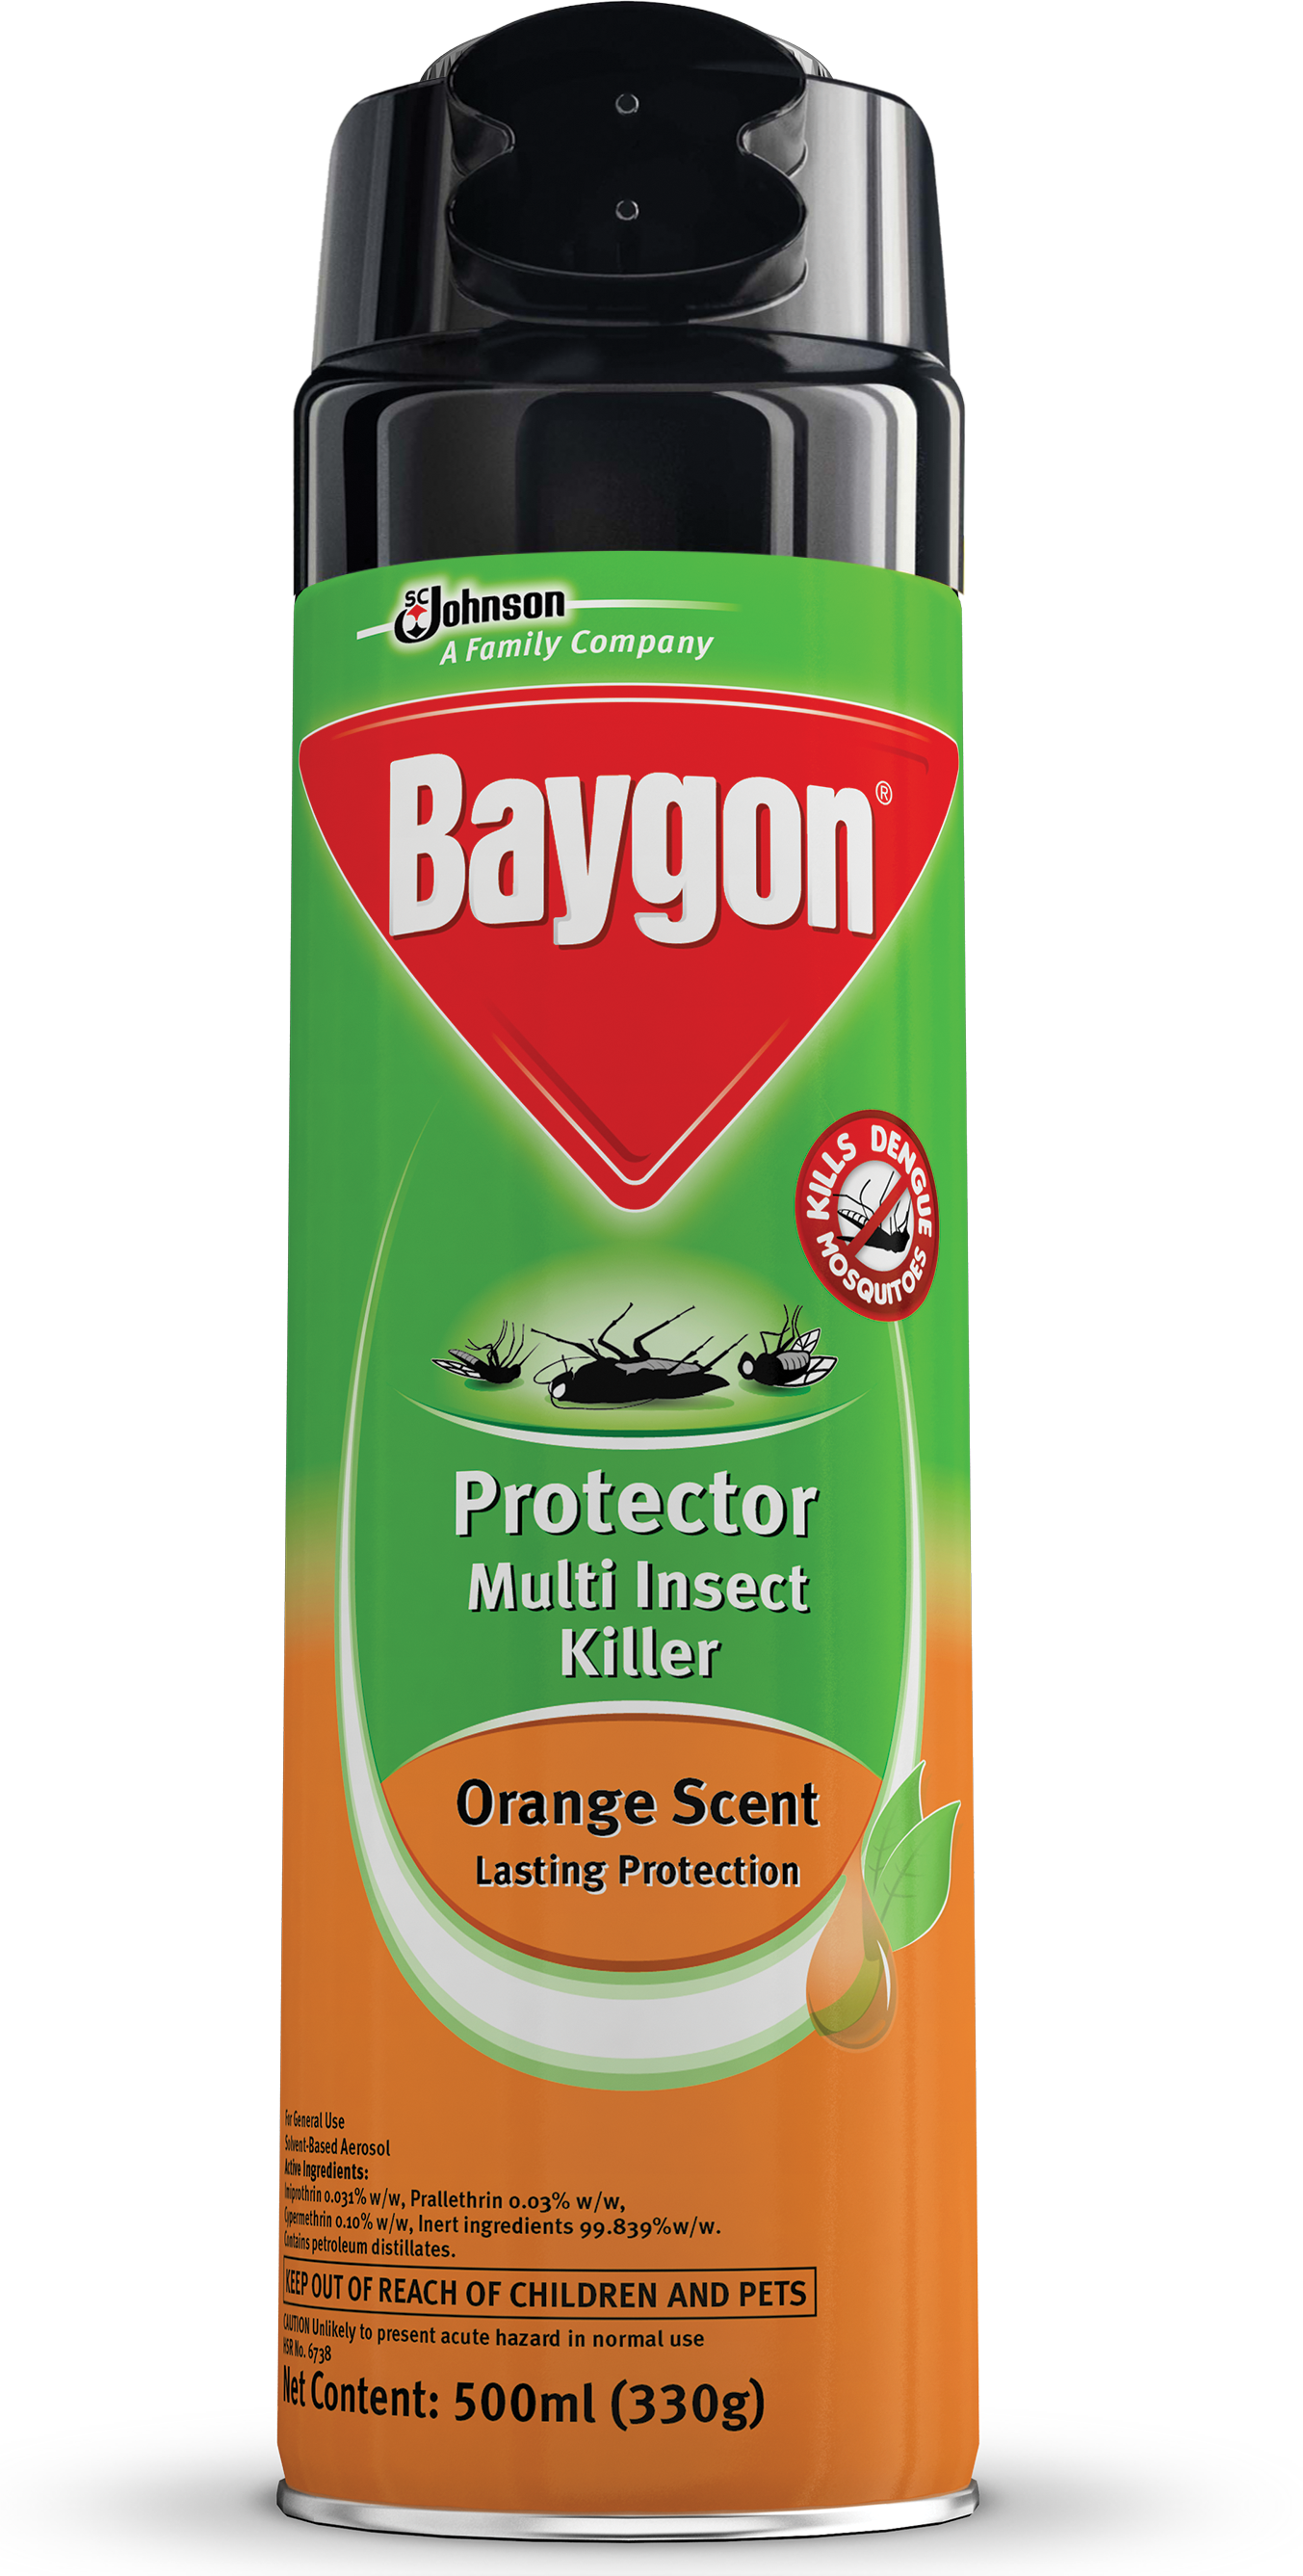 Baygon® Protector Multi Insect Killer